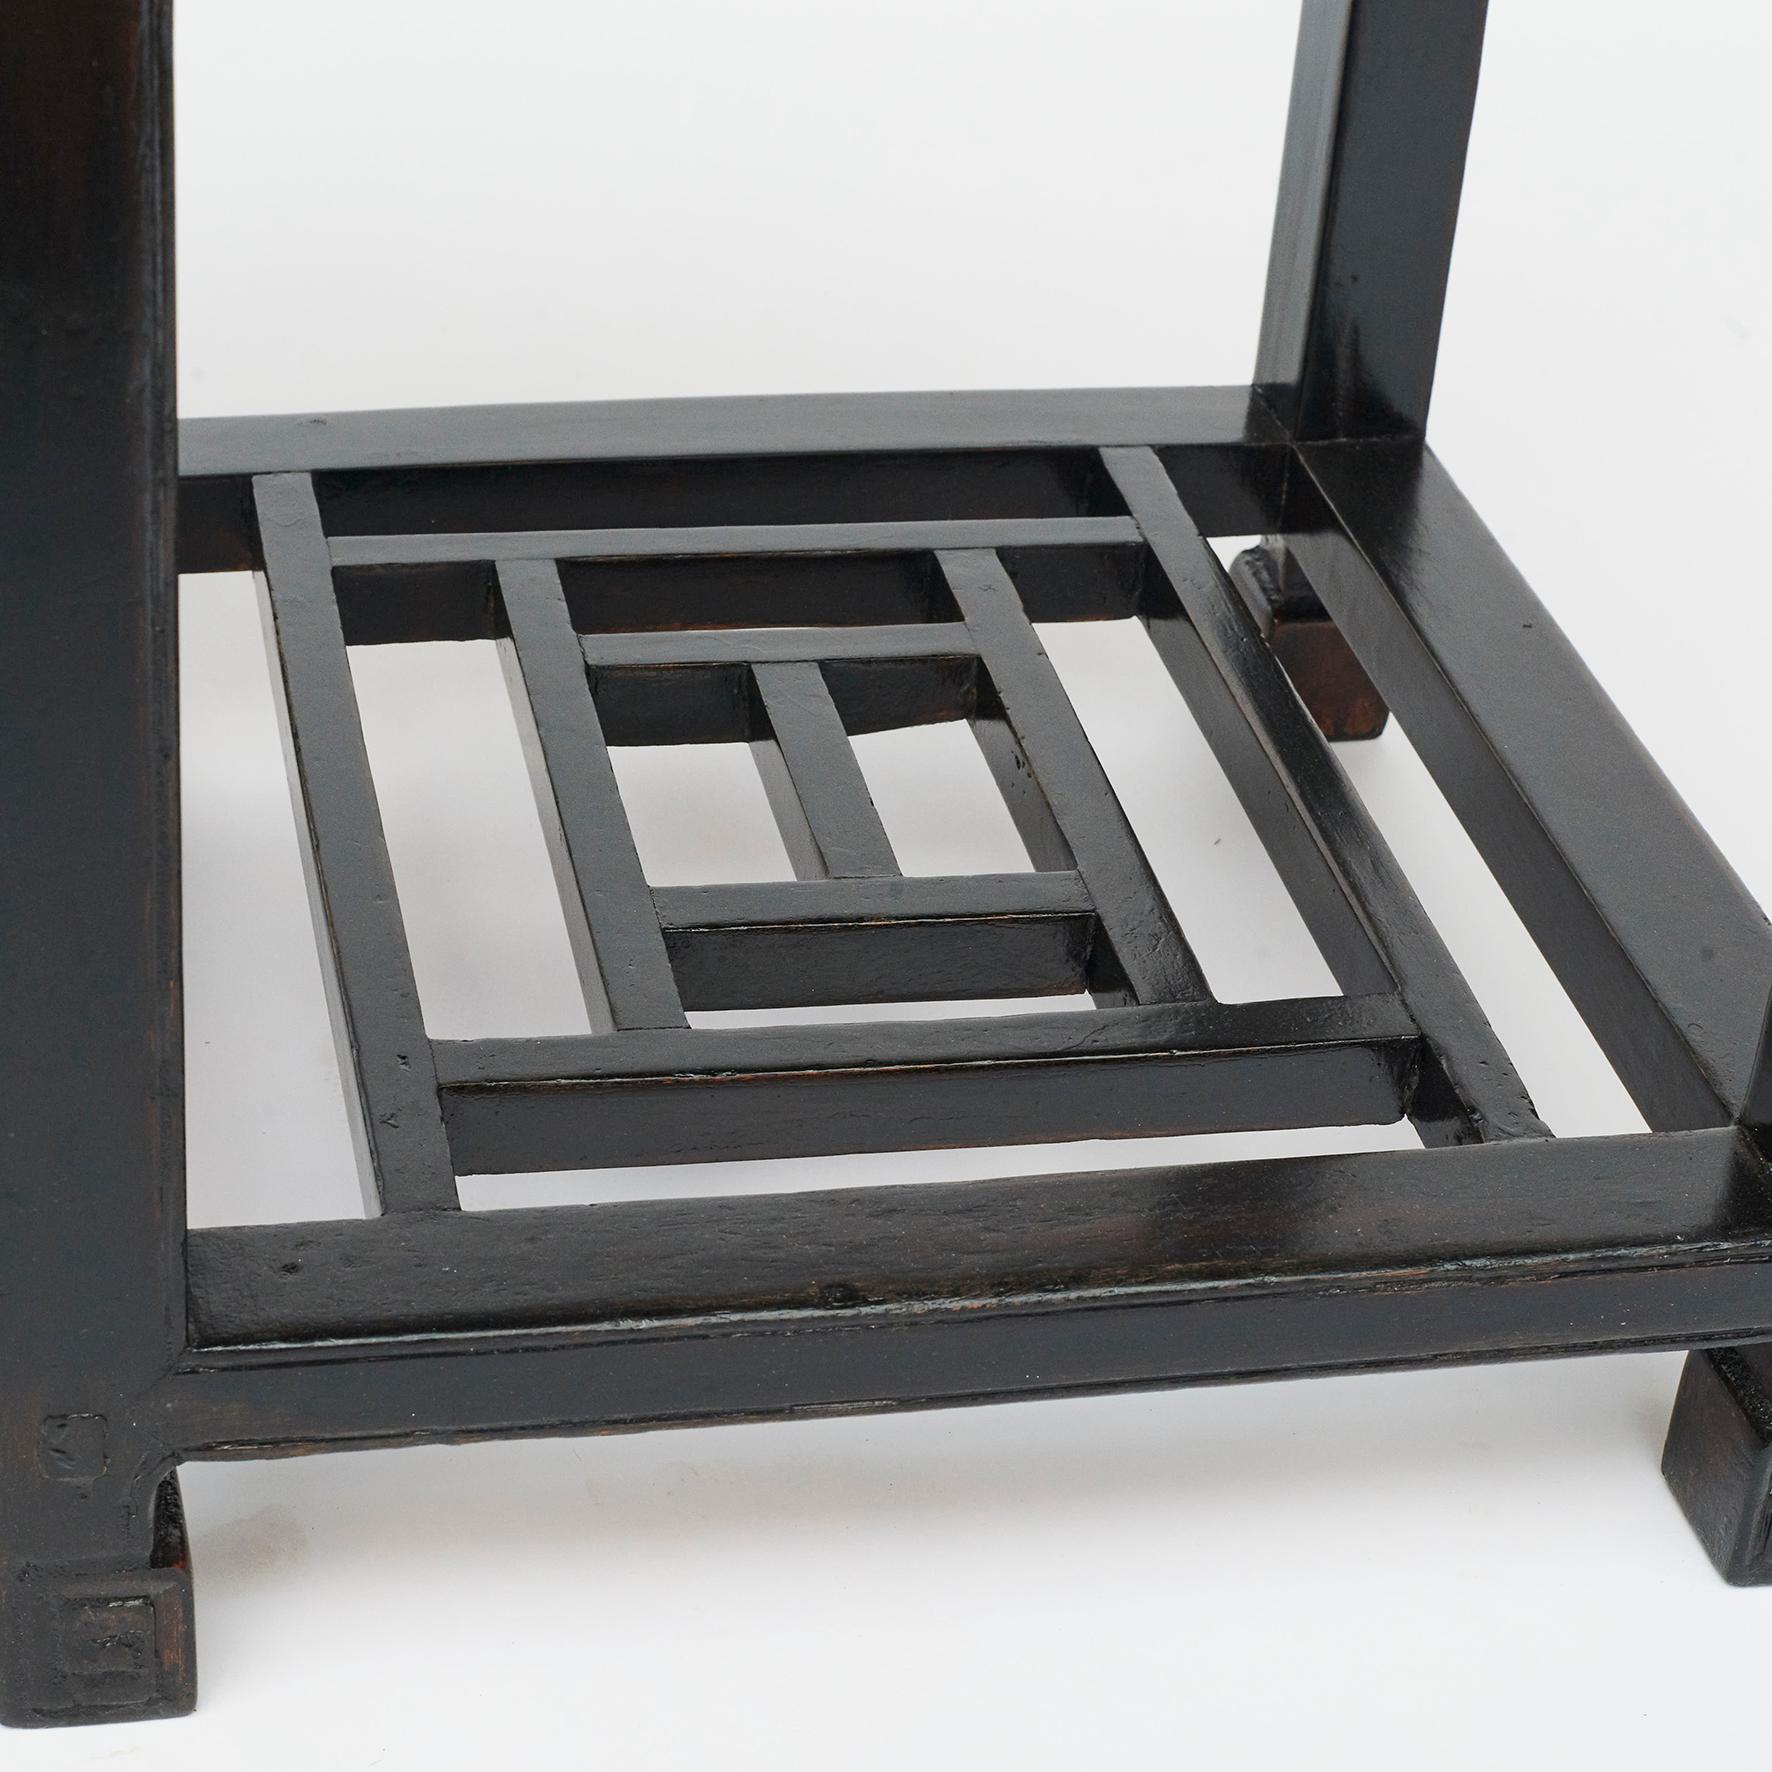 Chinese Pair of Square Black Lacquer End or Side Tables with Shelves, Beijing, 1910-1920